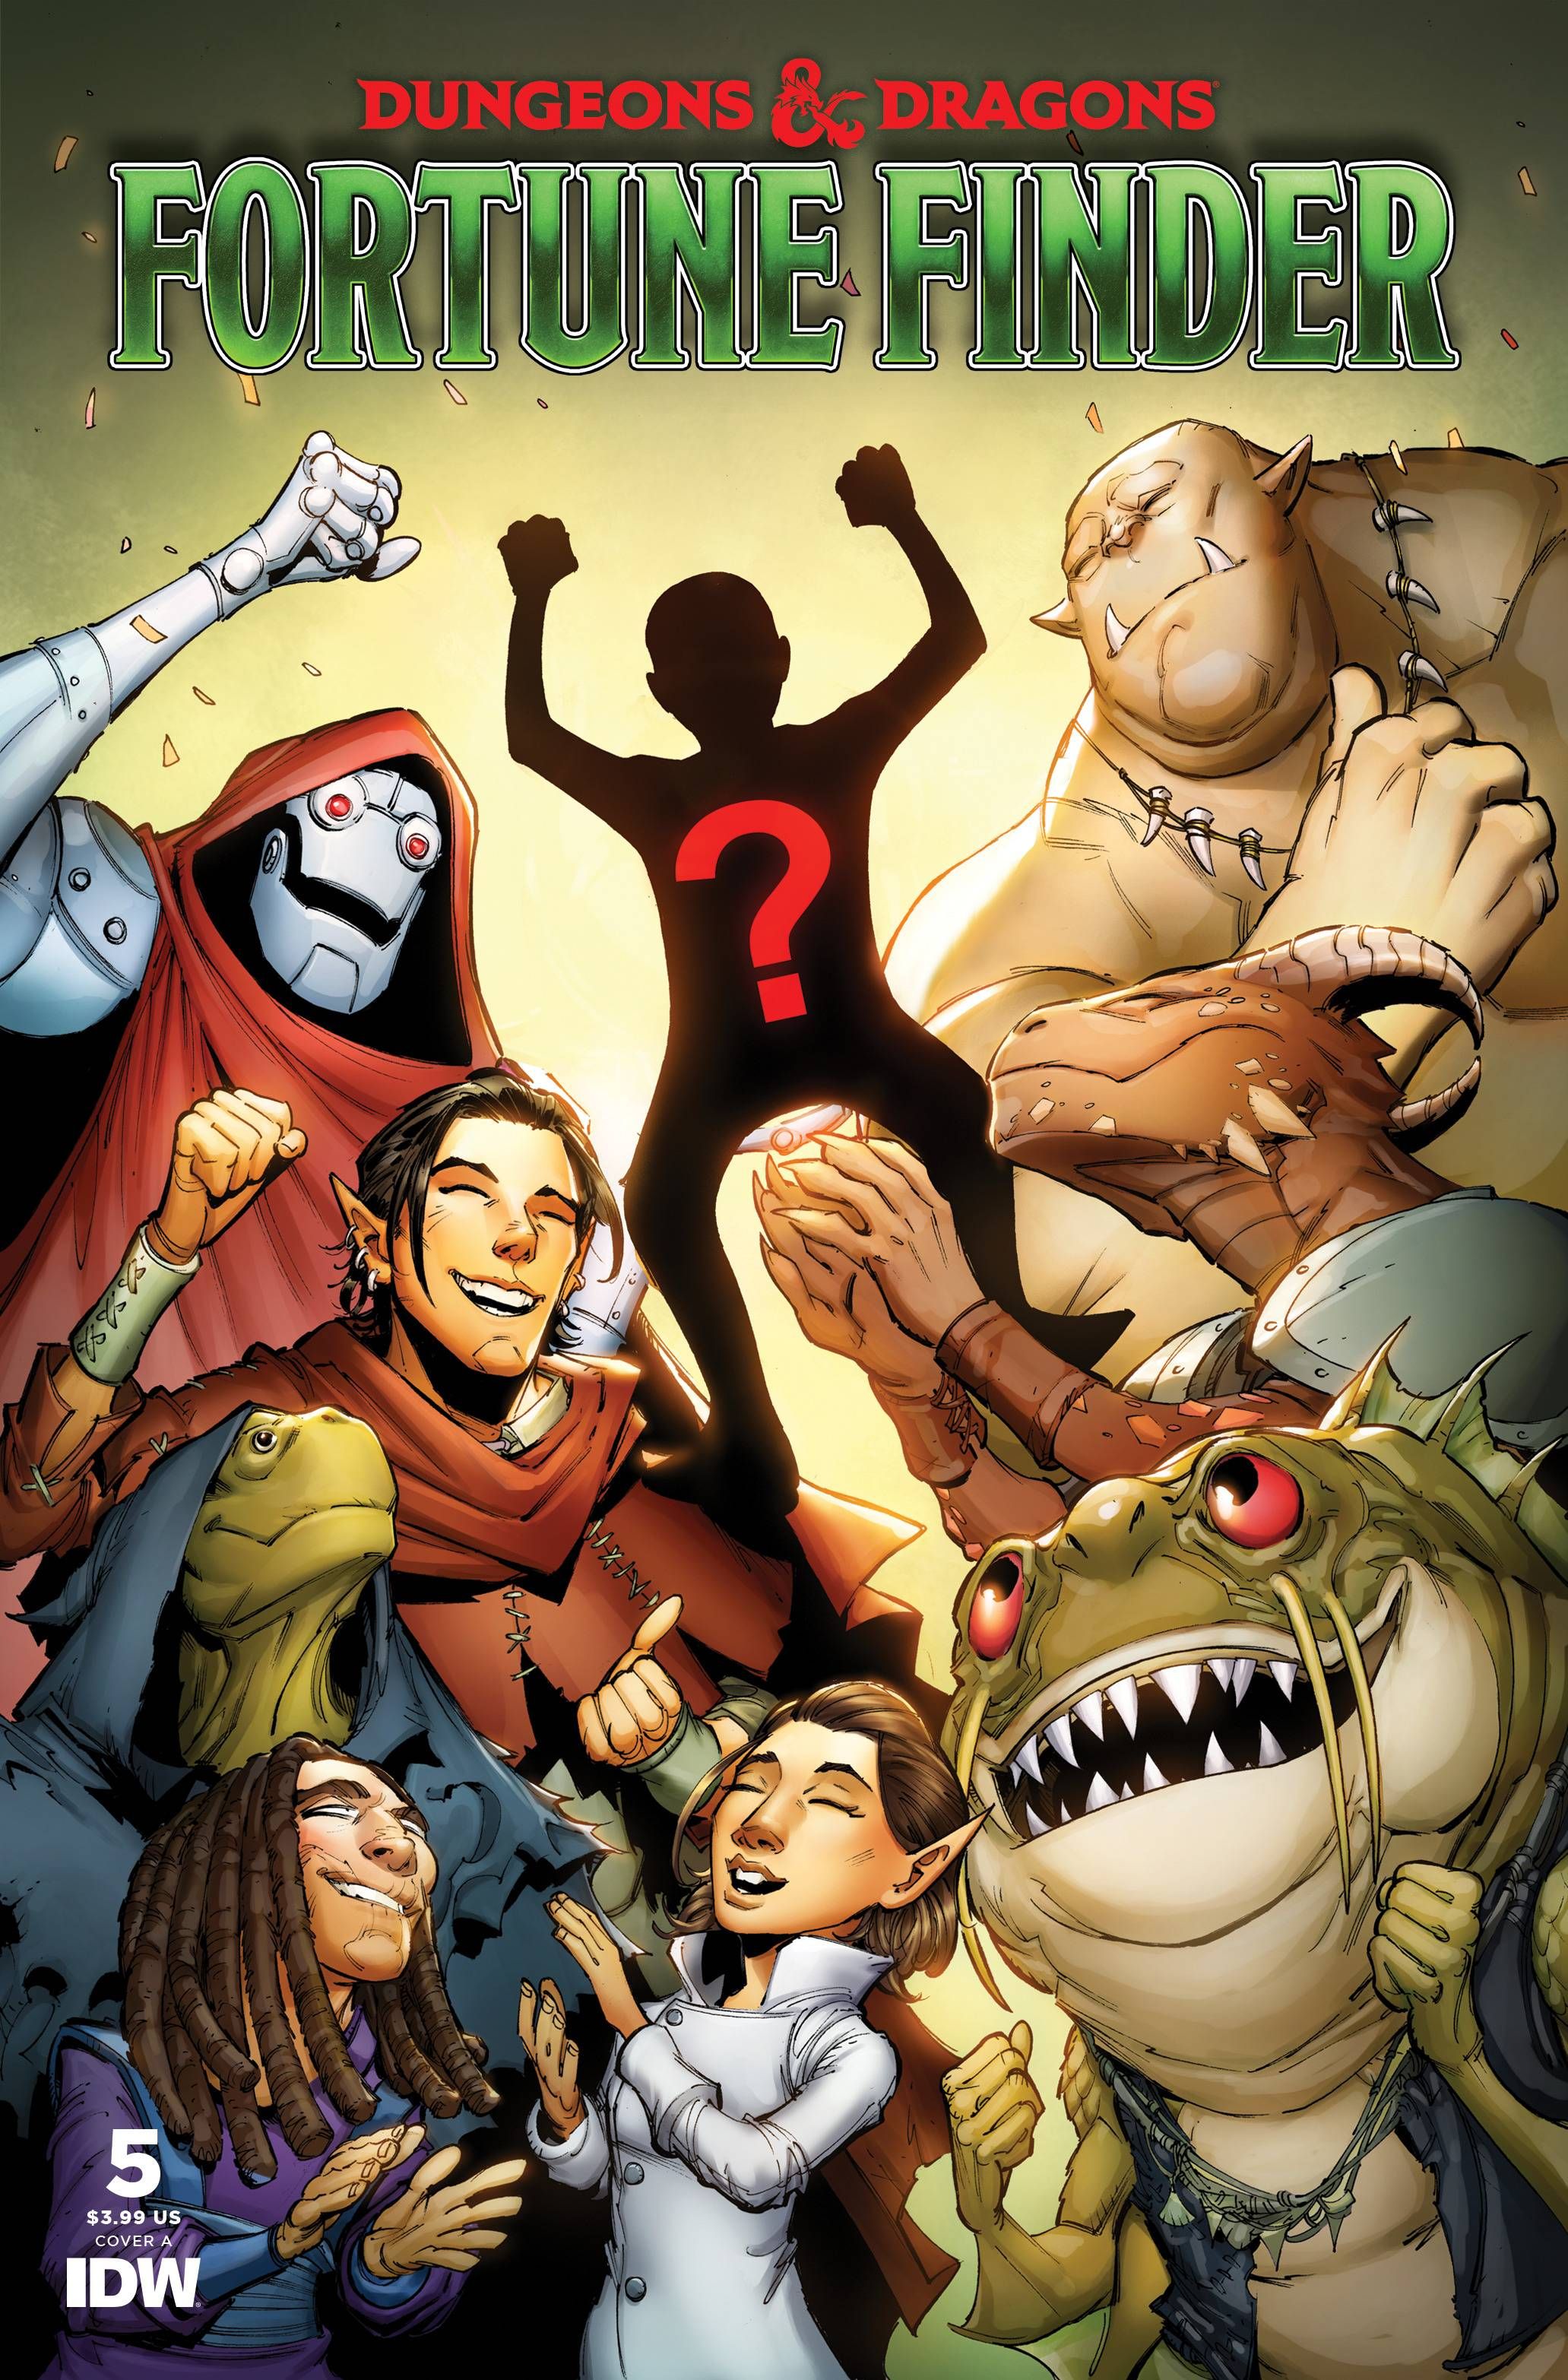 Dungeons & Dragons: Fortune Finder #5 Comic